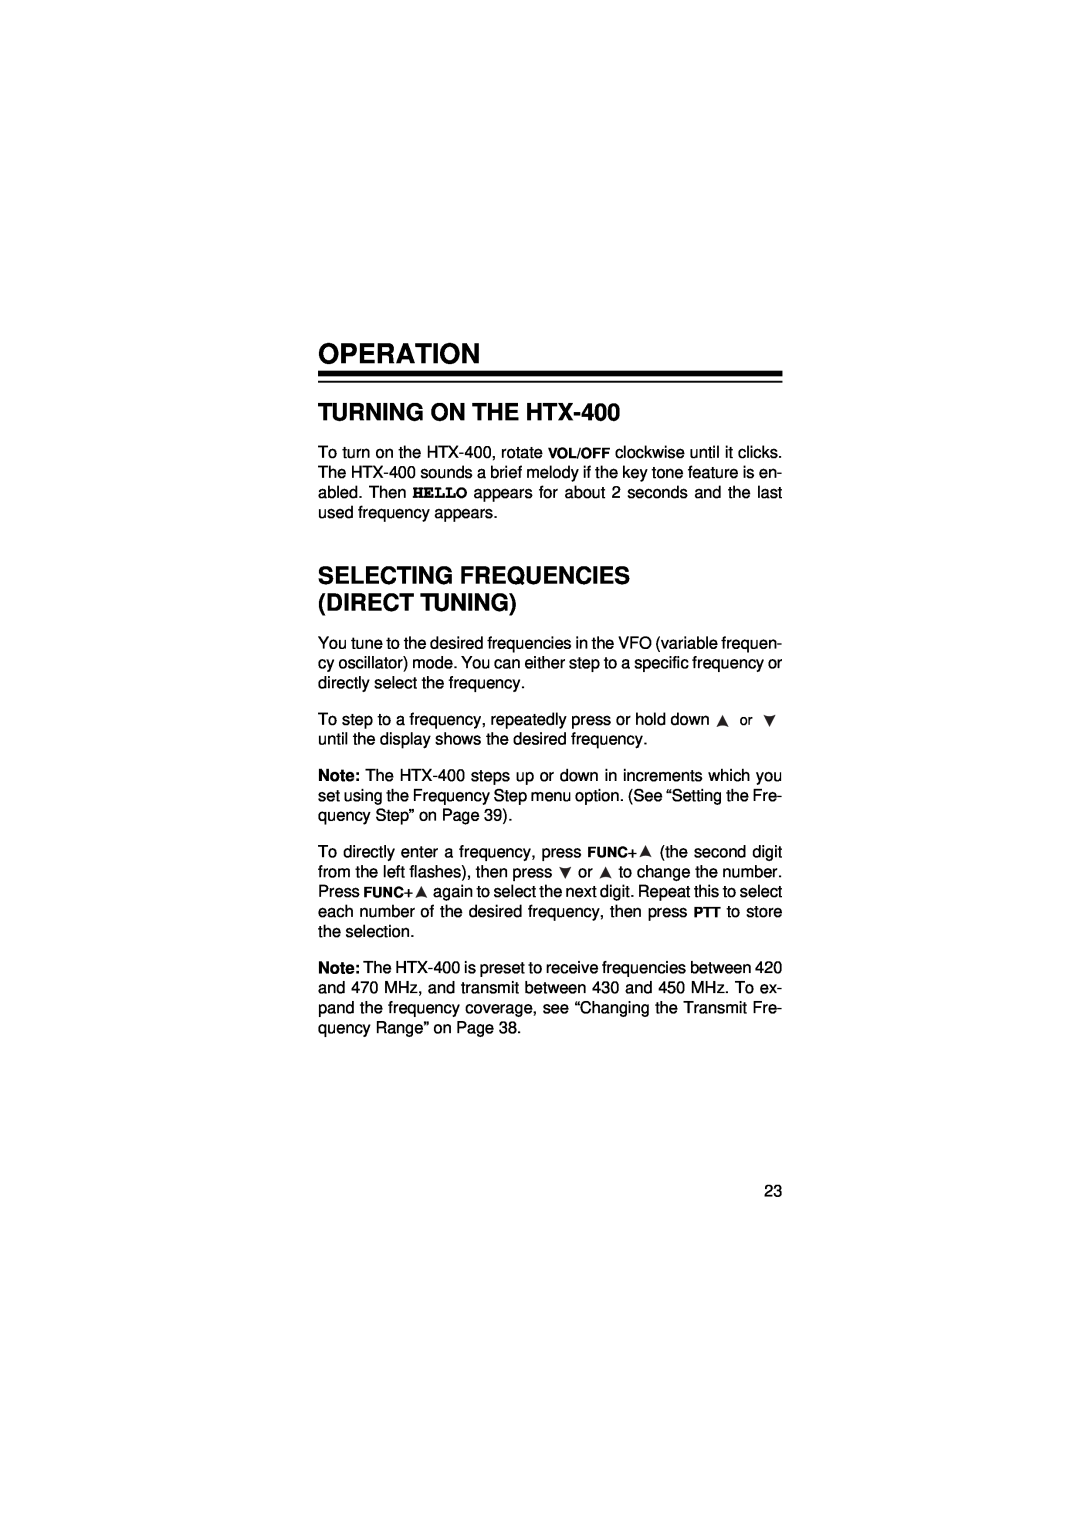 Radio Shack owner manual Operation, TURNING ON THE HTX-400, Selecting Frequencies Direct Tuning 